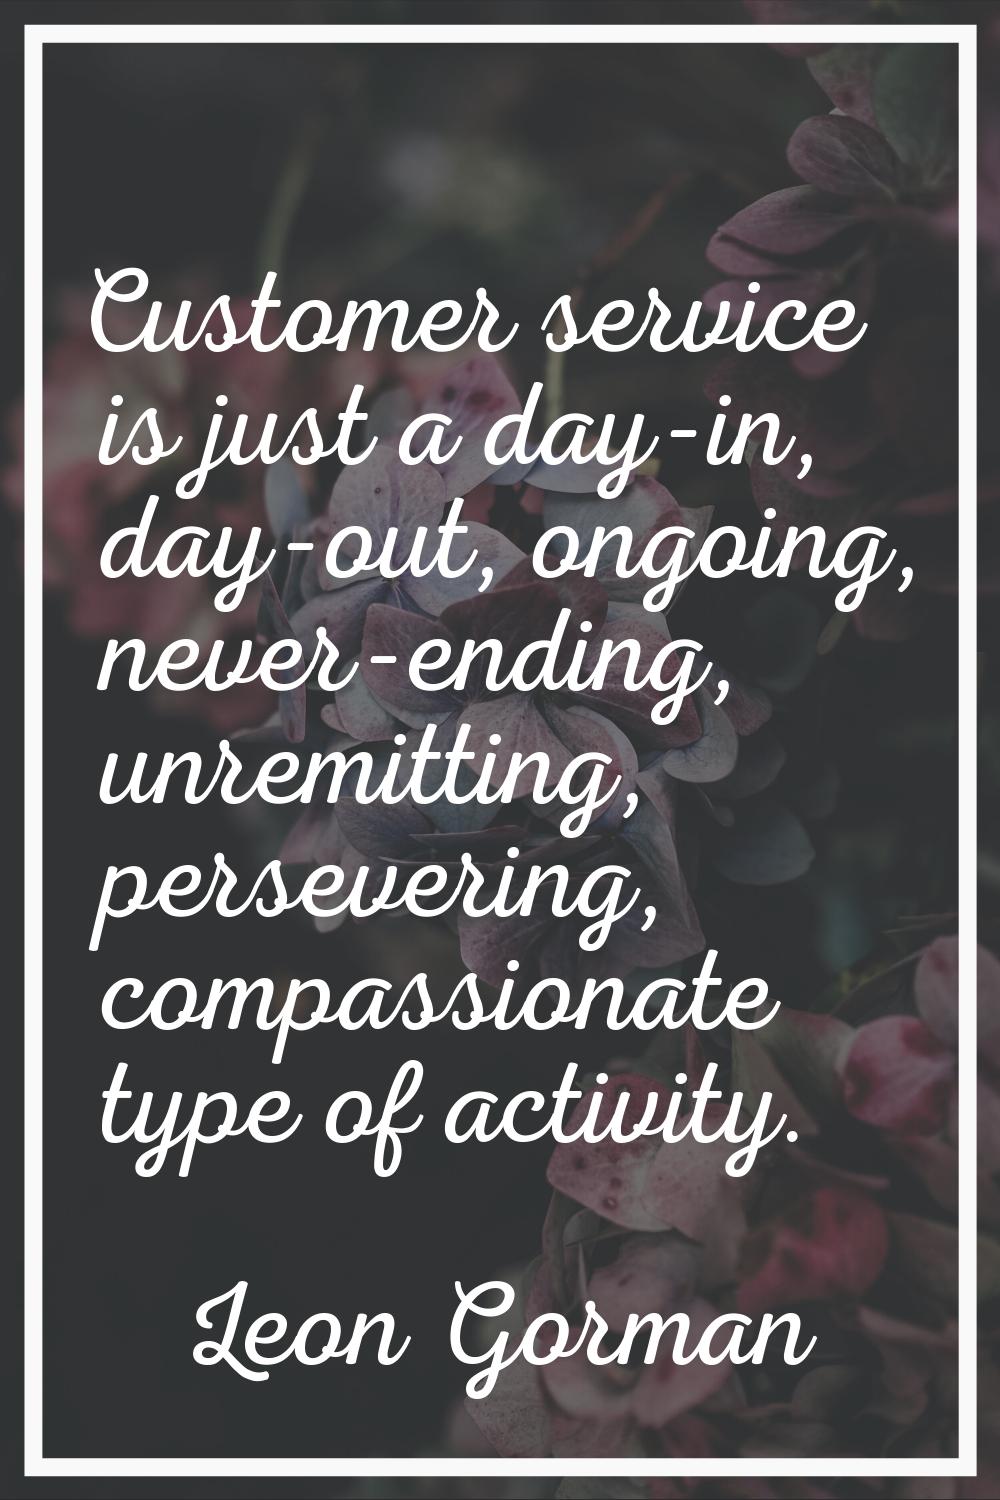 Customer service is just a day-in, day-out, ongoing, never-ending, unremitting, persevering, compas